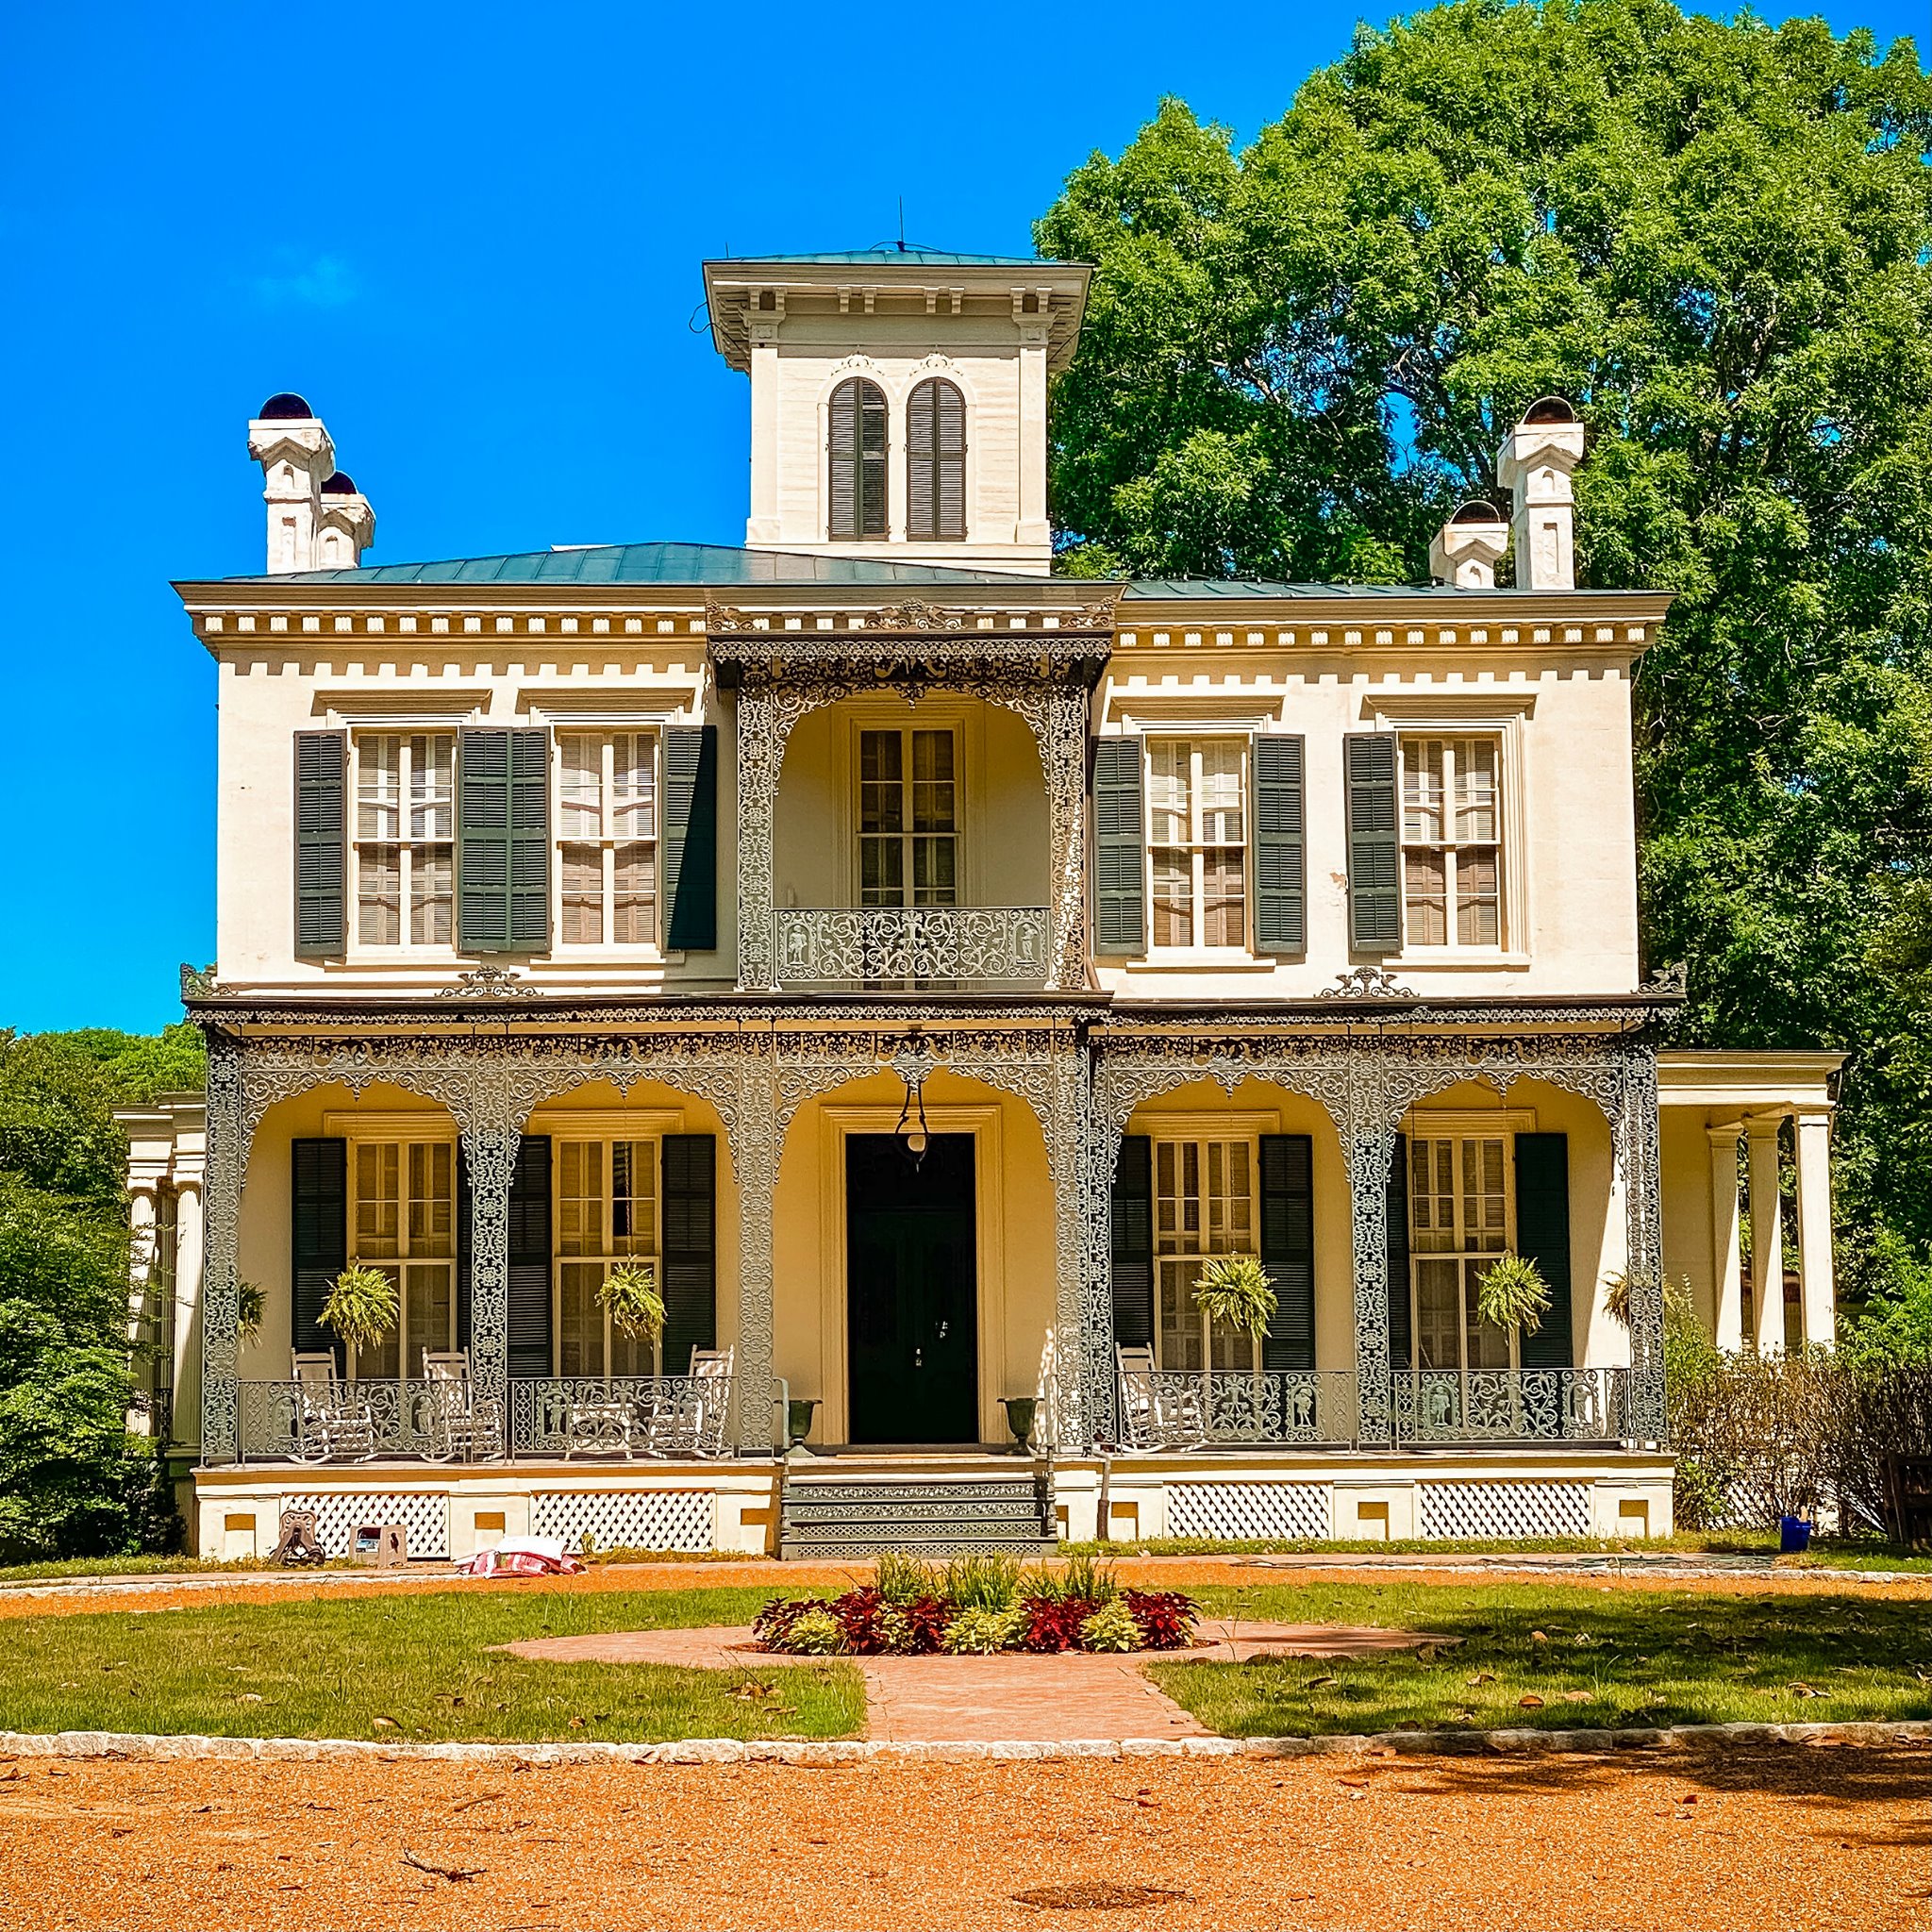 McNeal House in Bolivar